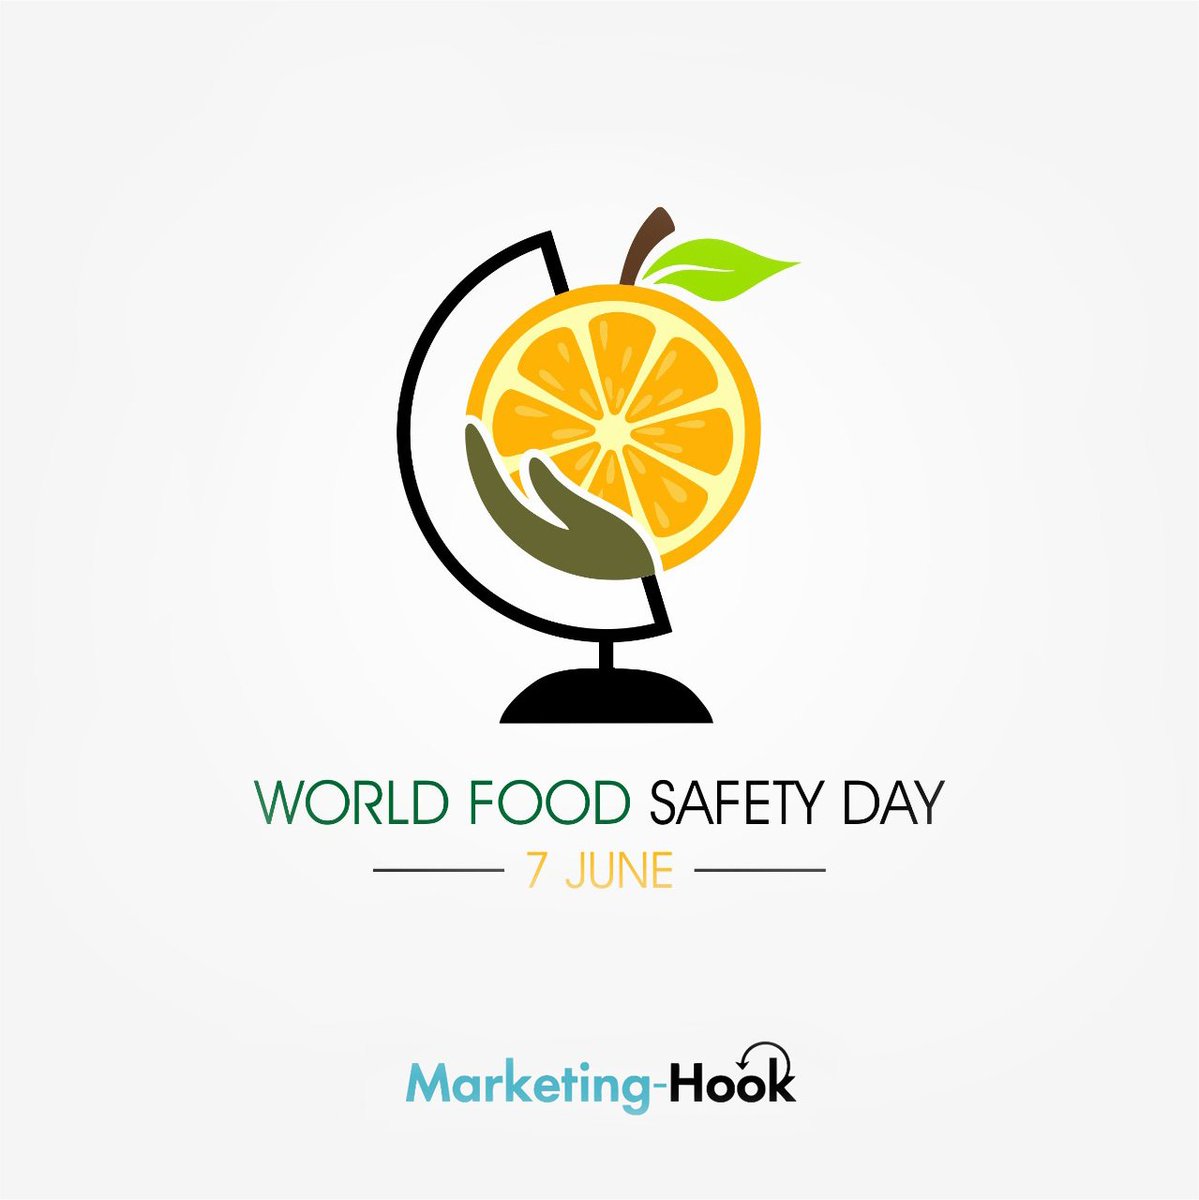 Wishing you a Happy World’s Food Safety Day.
Be Happy. Be Healthy.

#happyworldfoodsafetyday